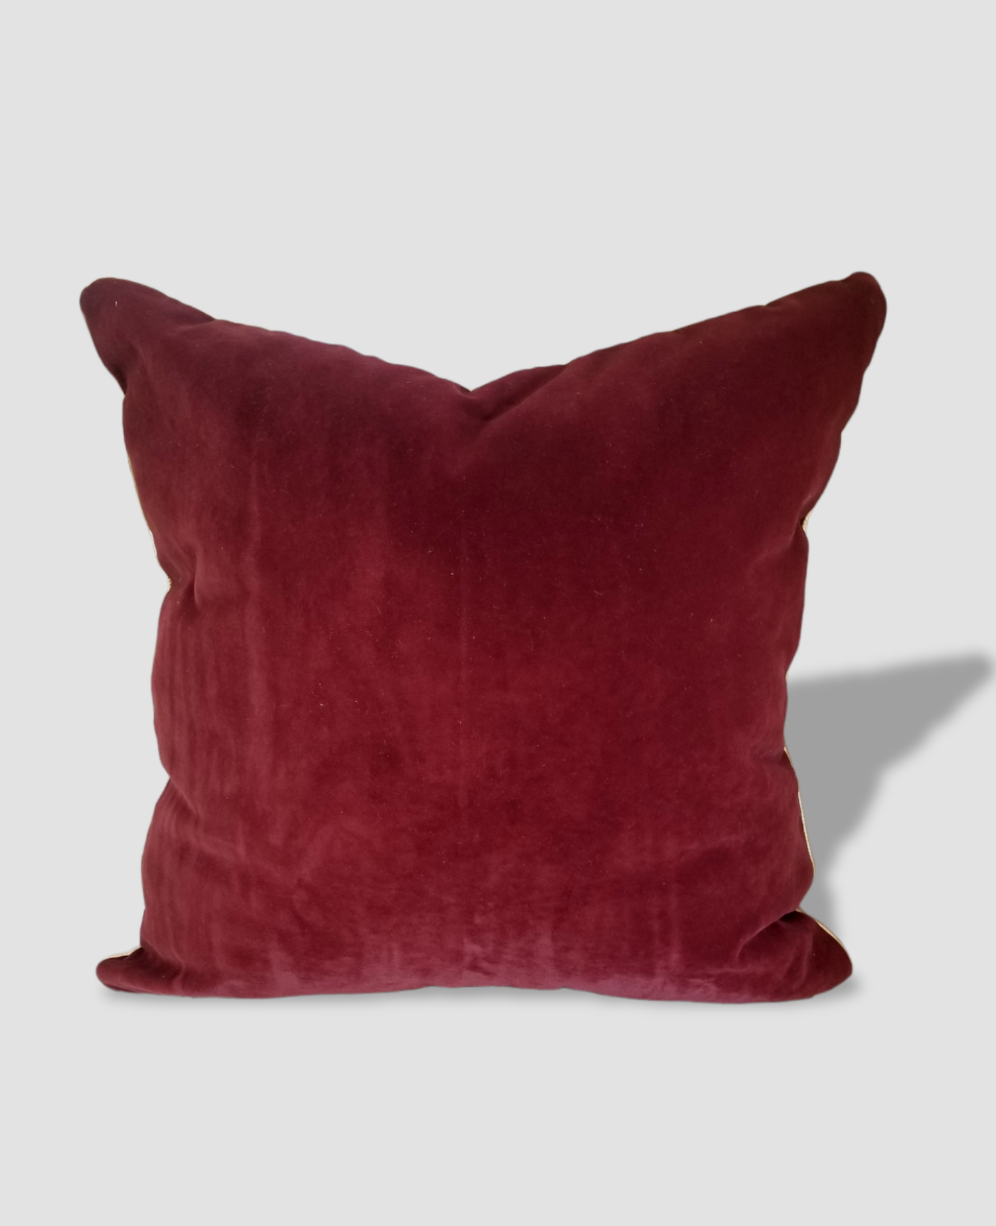 Luxury Decorative Pillow. Red, Blue and Black Velvet with Gold Piping. –  Advenique Home Decor | Handmade Designer Pillows